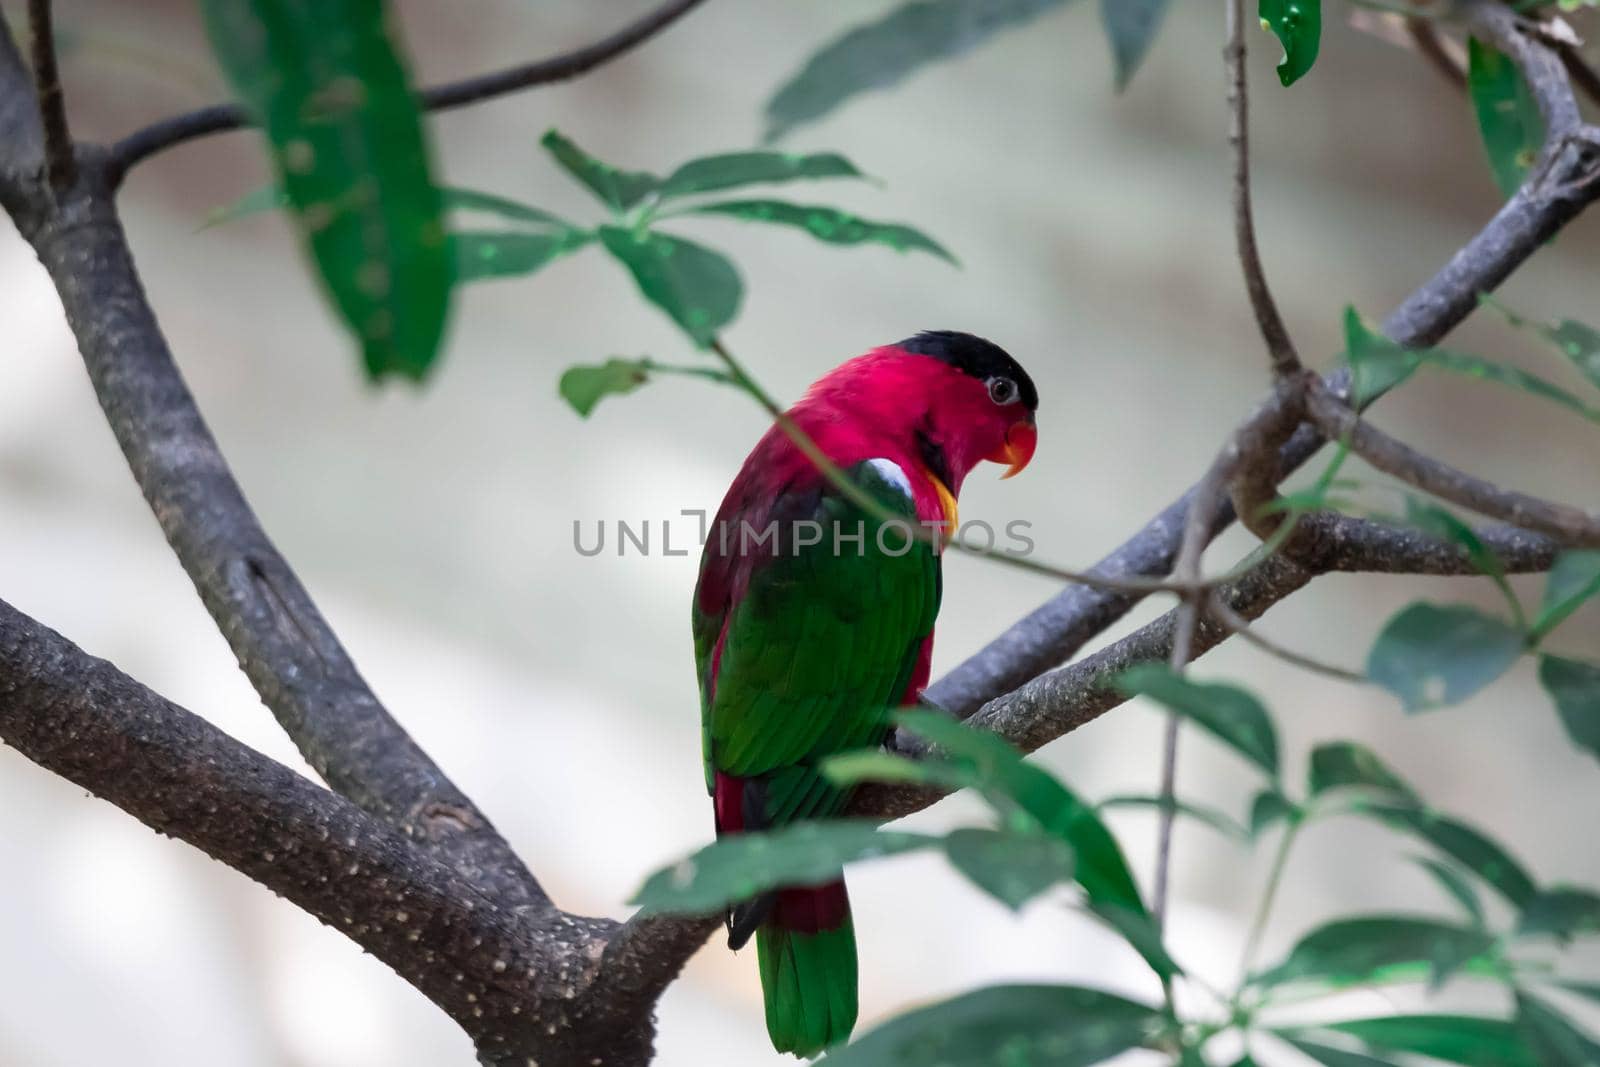 A yellow-bibbed lory (Lorius chlorocercus) perches on the branch. It is a species of parrot in the family Psittaculidae. It is endemic to the southern Solomon Islands.